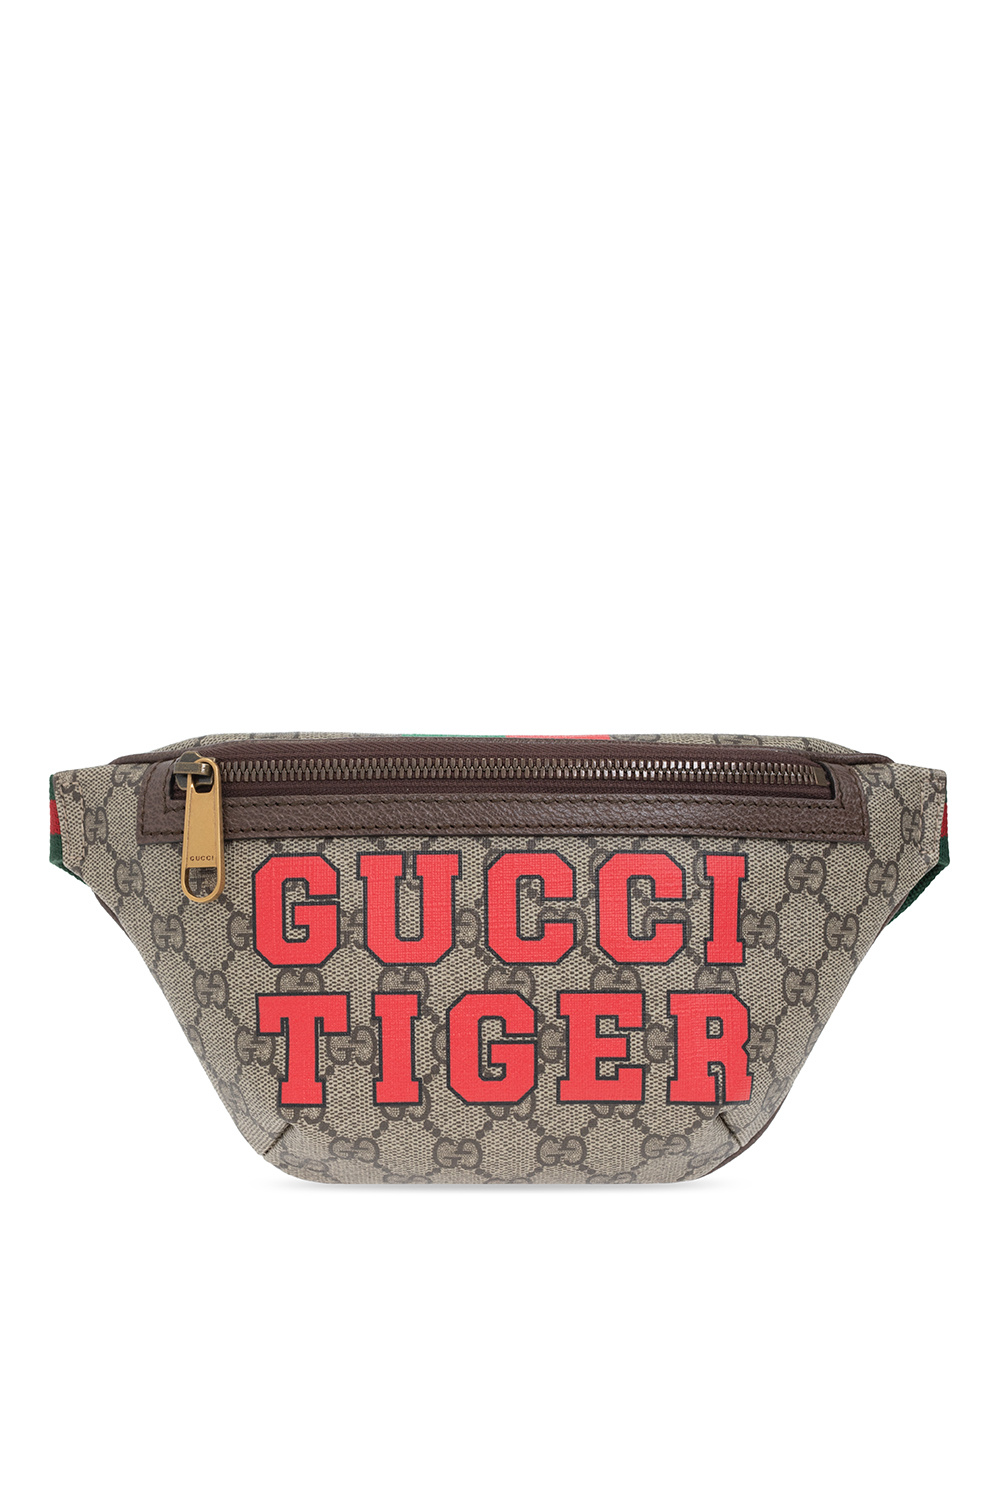 Palace x Gucci is Coming Very Soon - Belt bag from the 'Gucci Tiger'  collection Gucci - Biname-fmedShops Uruguay